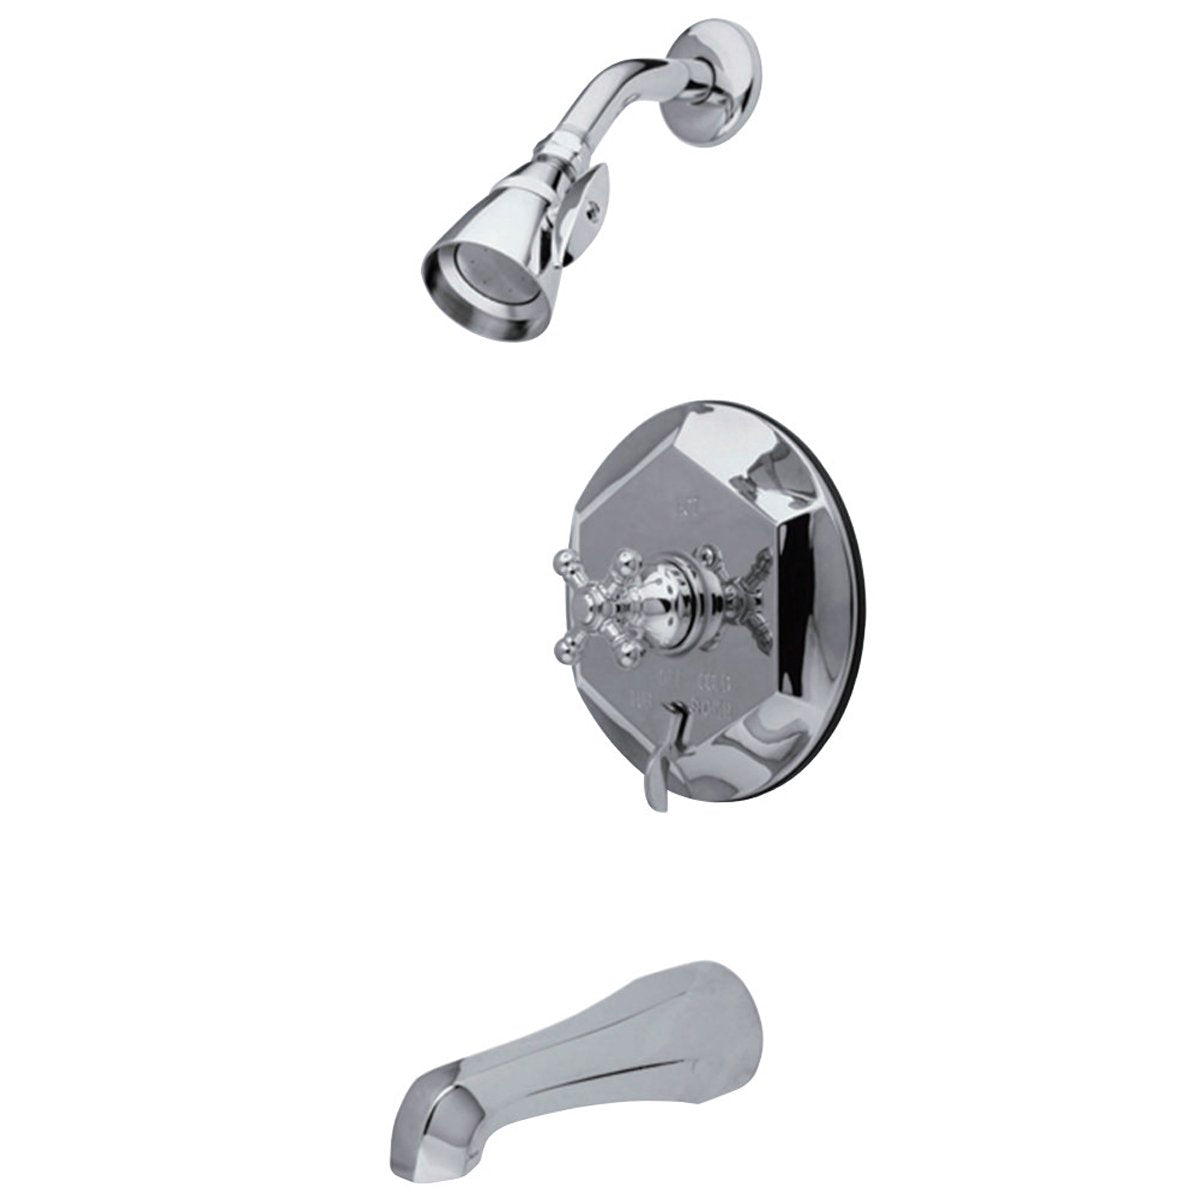 Kingston Brass English Vintage Tub with Shower Faucet